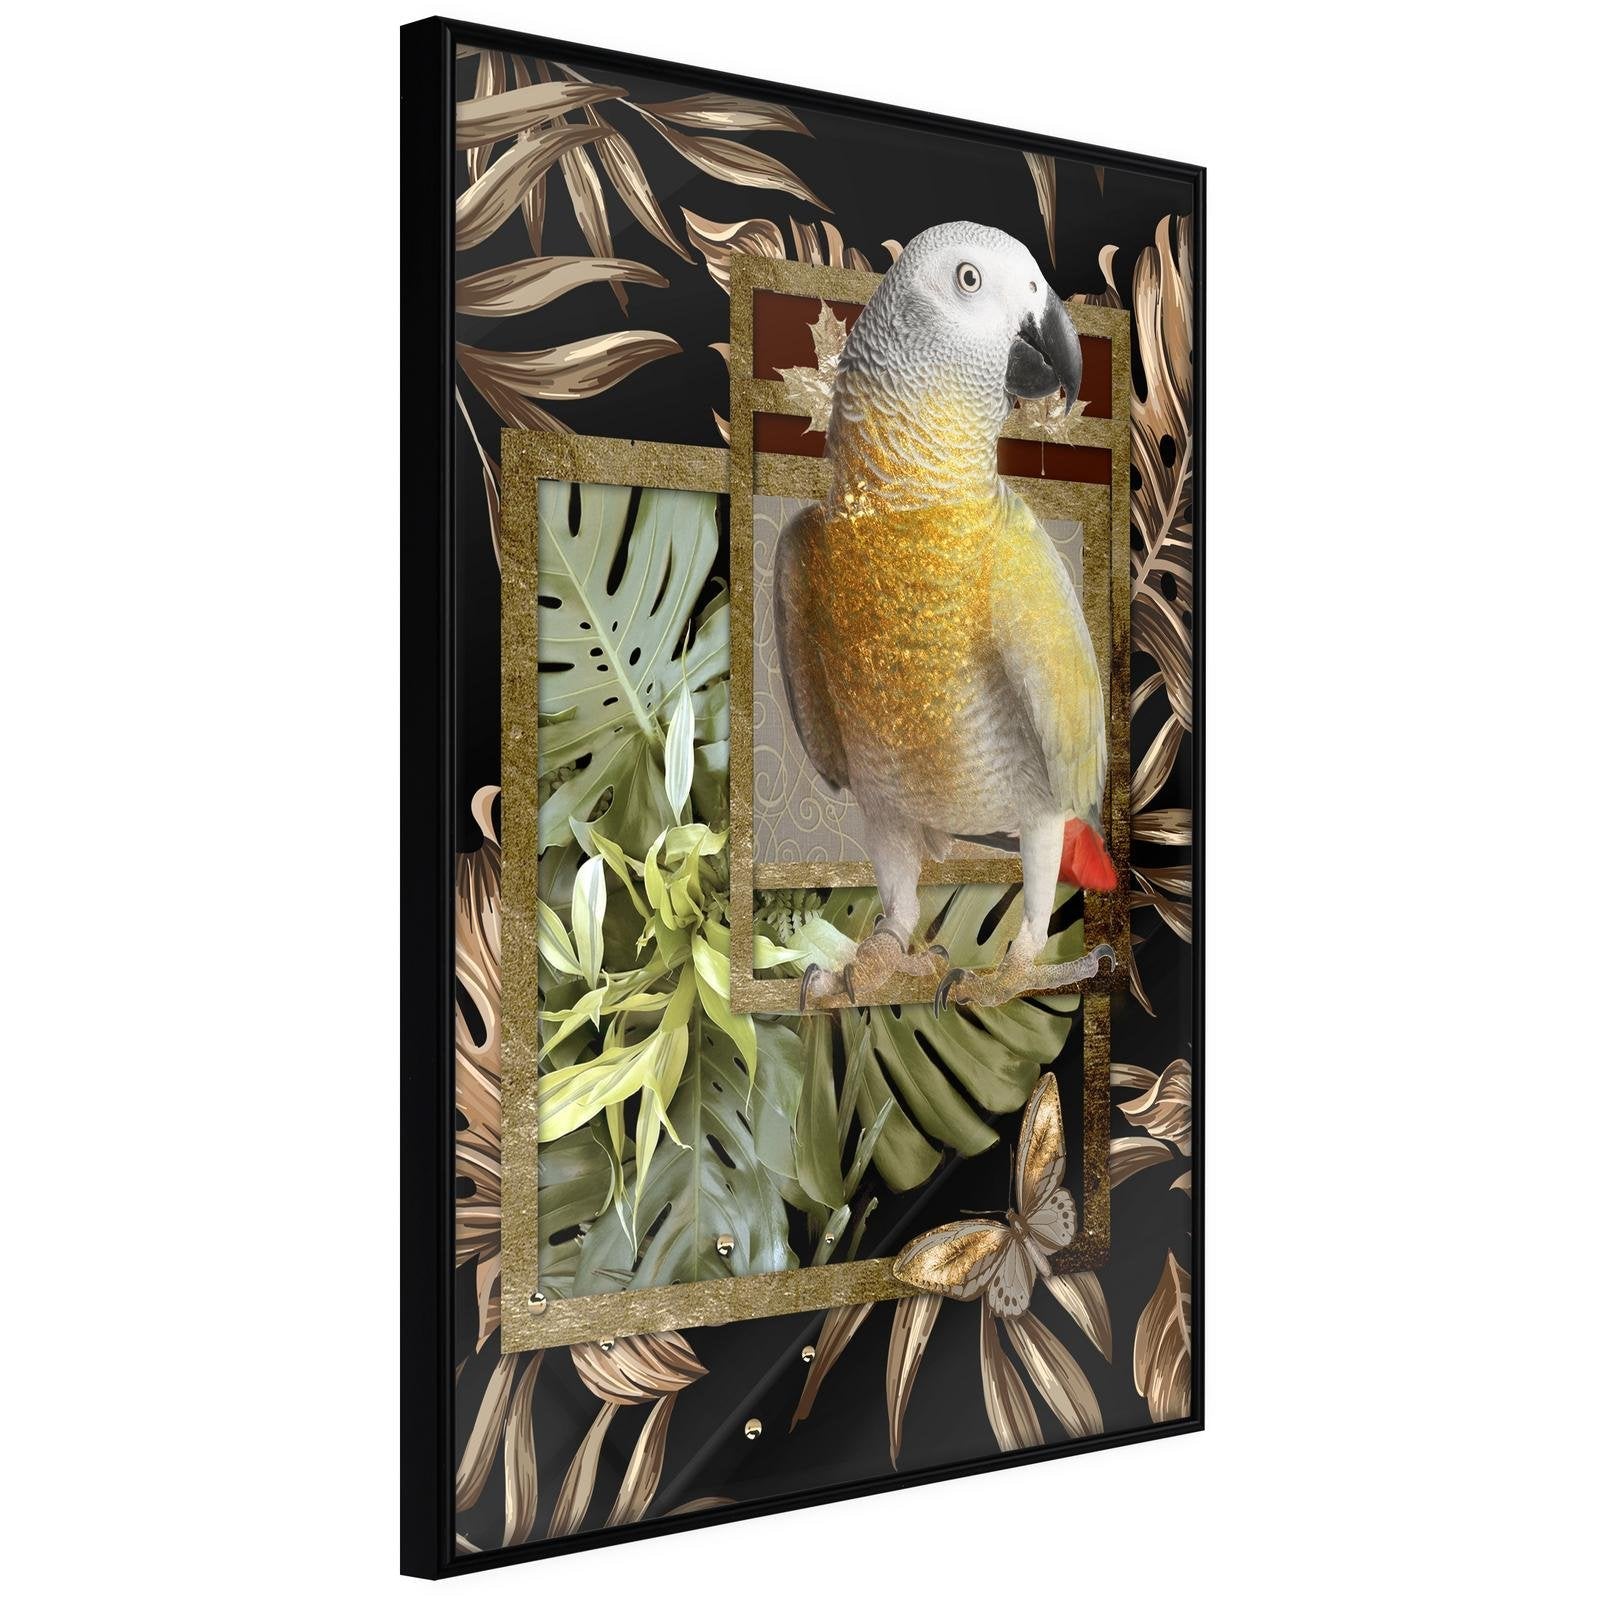 Inramad Poster / Tavla - Composition with Gold Parrot - 40x60 Svart ram